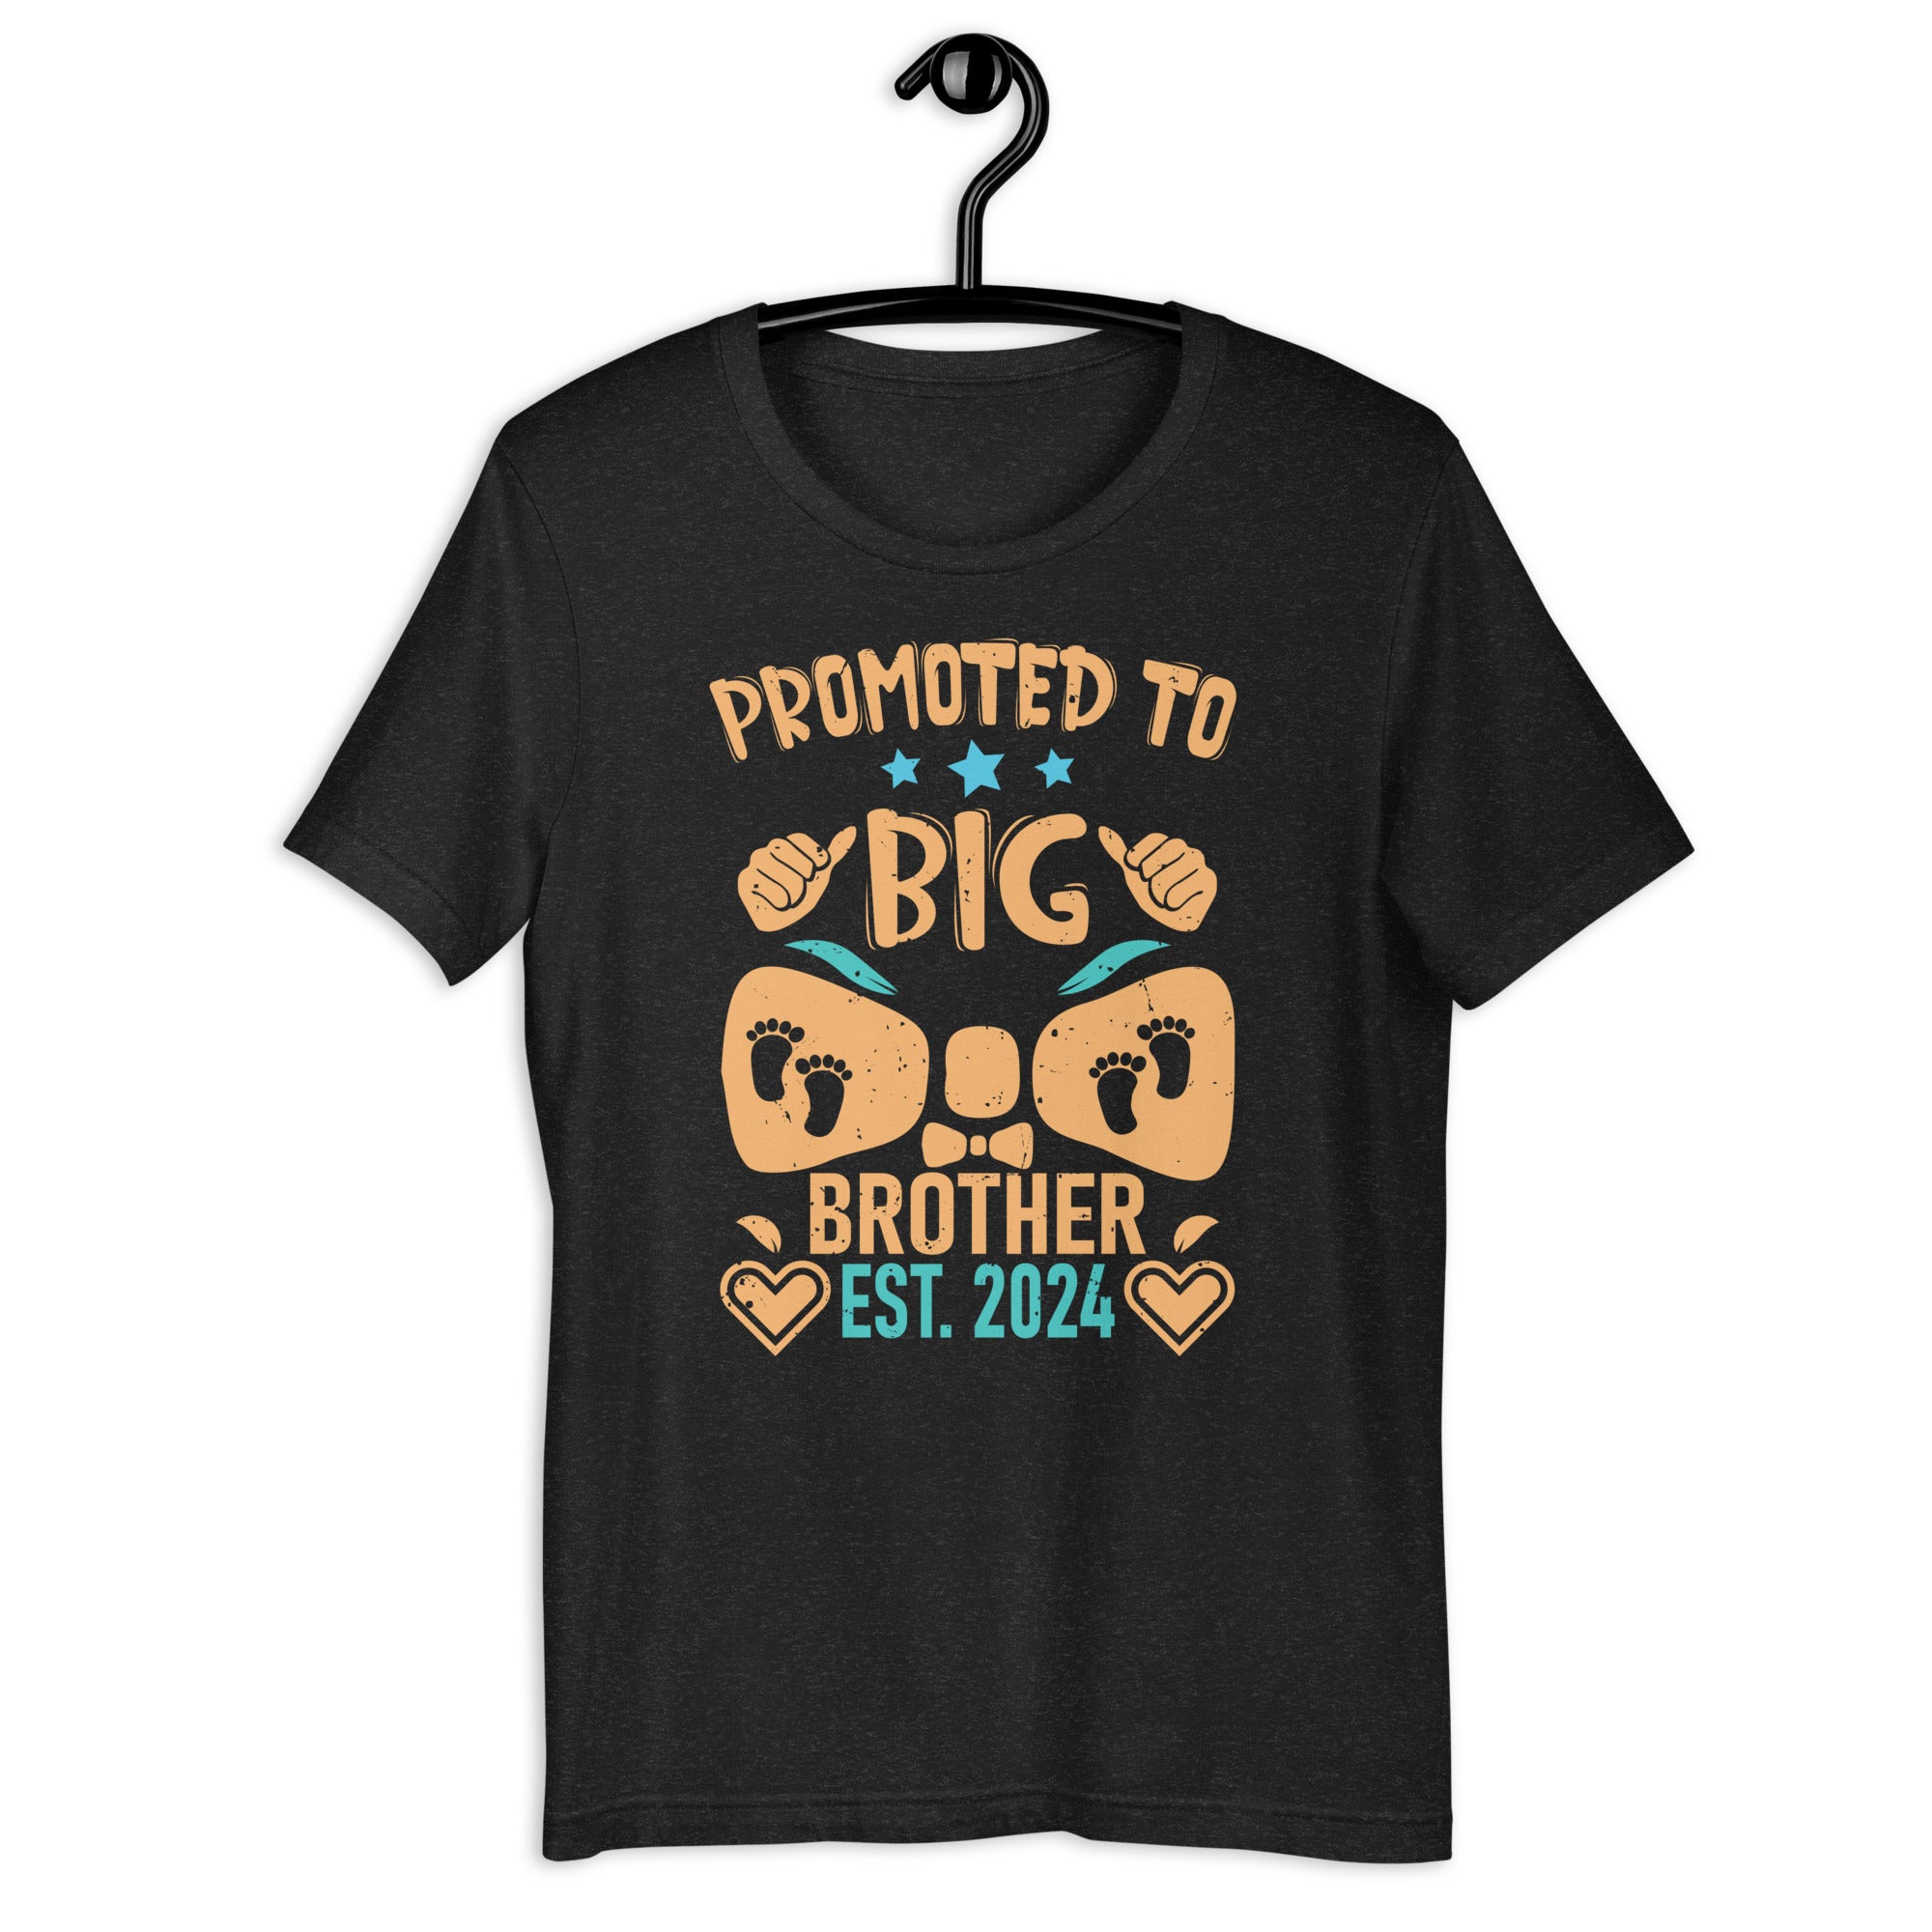 Promoted to big brother est. 2024 for pregnancy or new baby  Unisex t-shirt